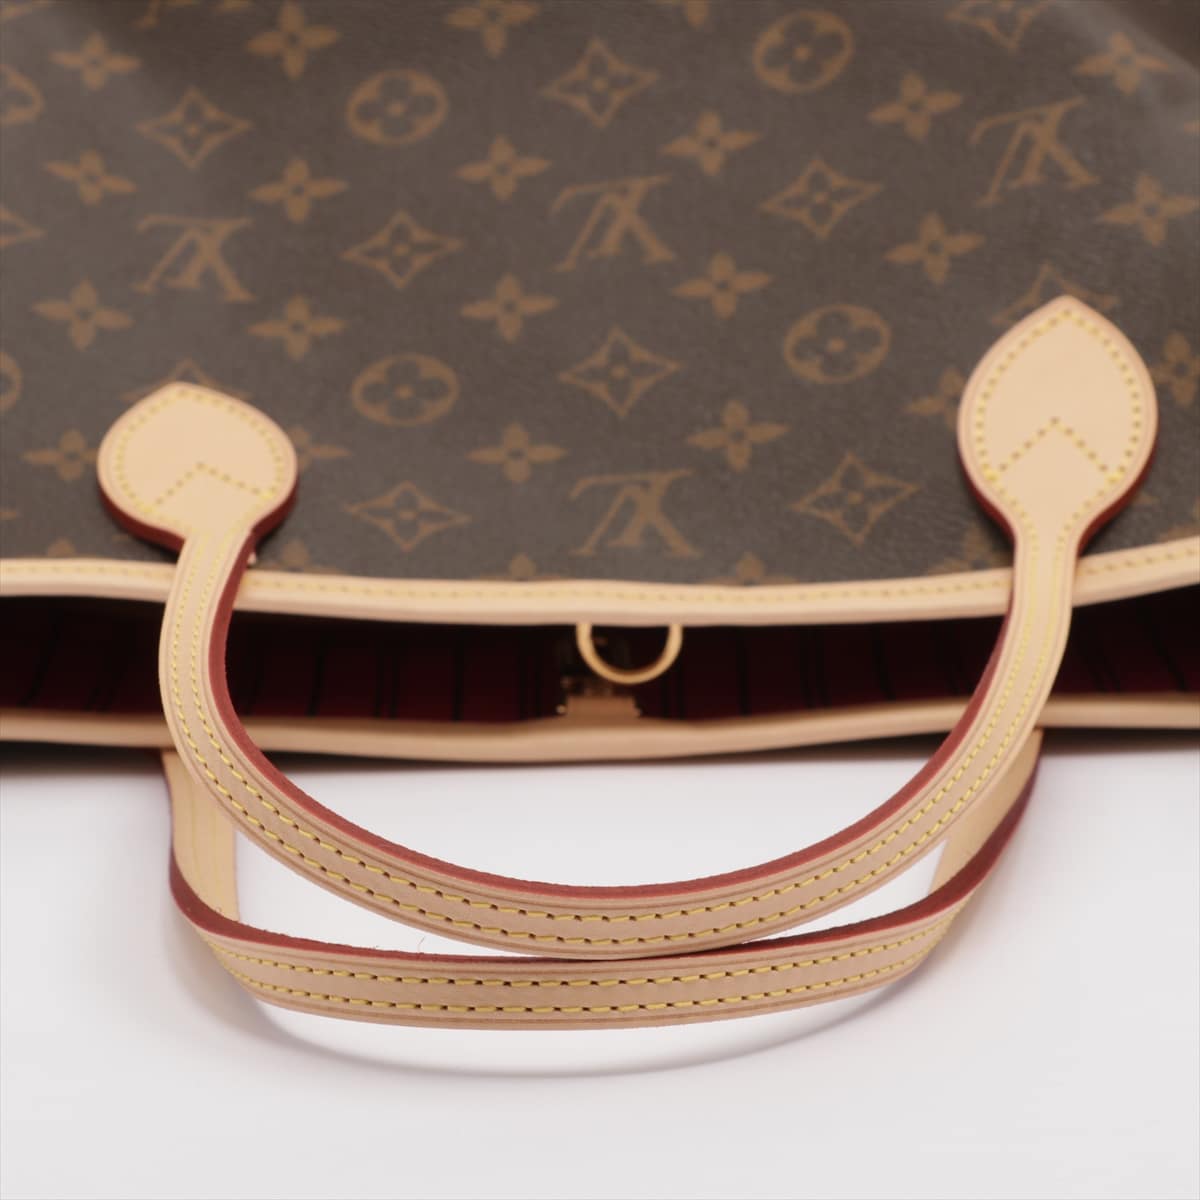 Louis Vuitton Monogram Neverfull PM M41245 with pouch